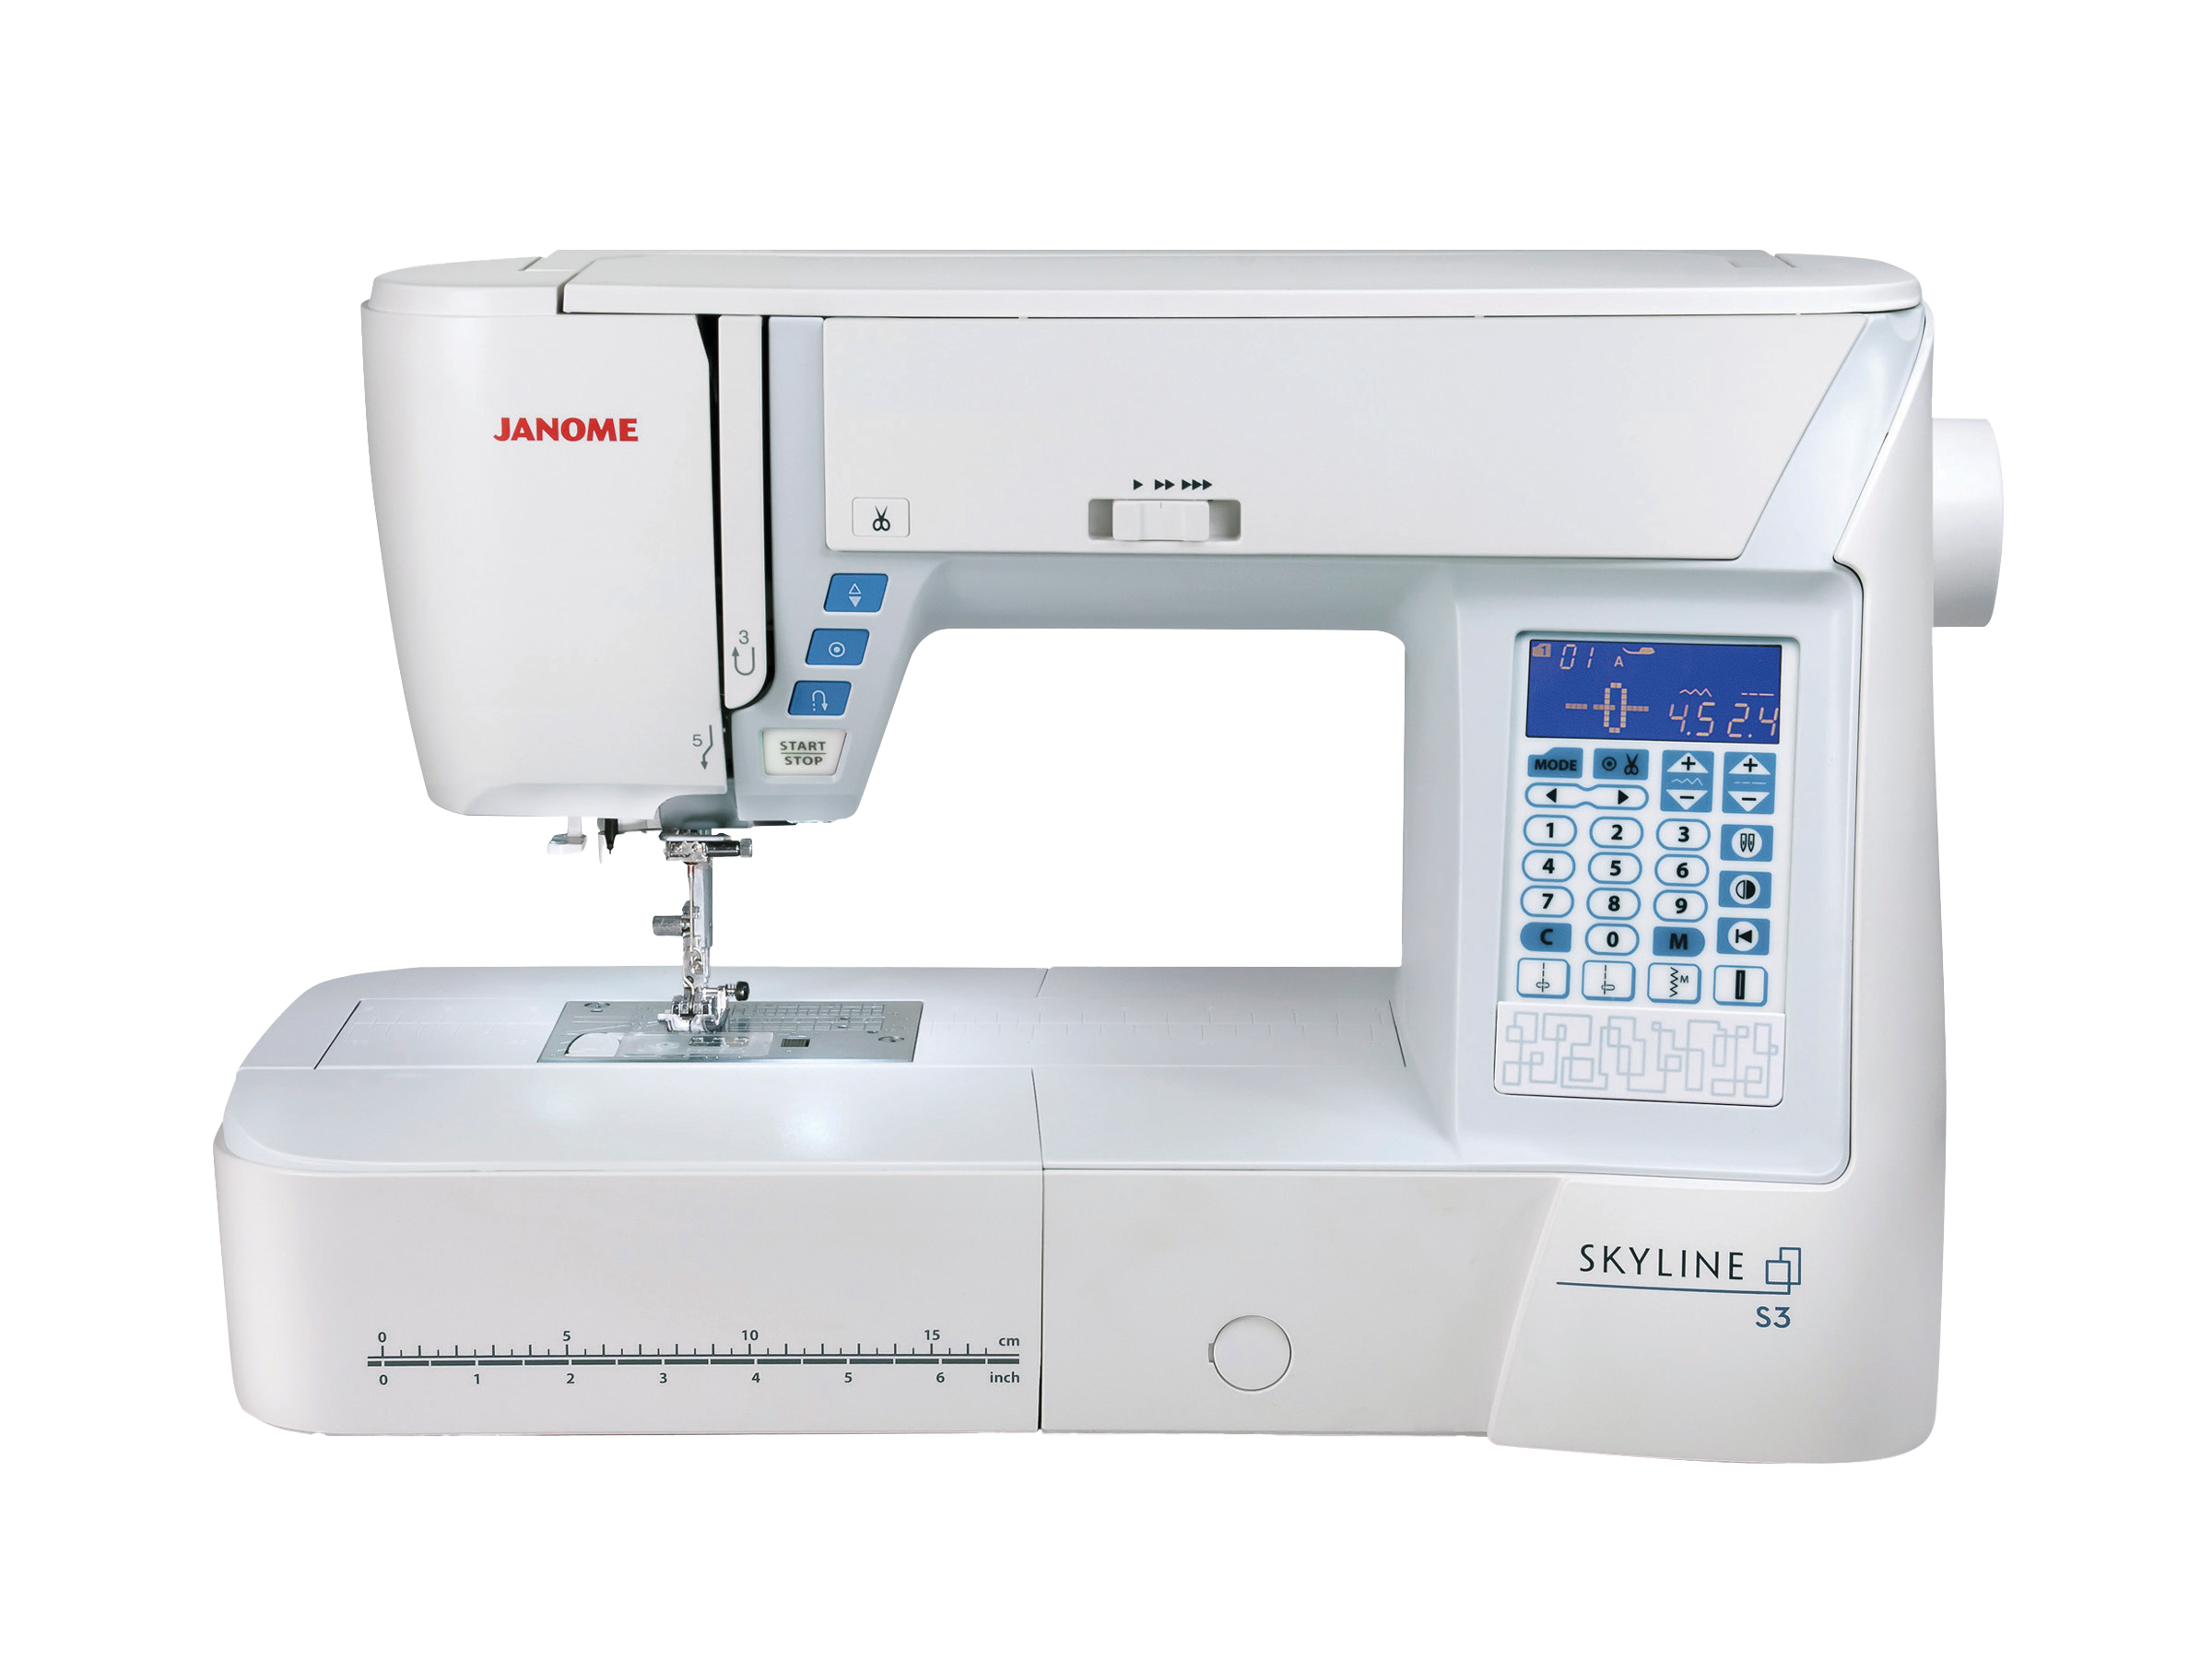 Janome Skyline S3 Sewing and Quilting Machine for Sale at World Weidner